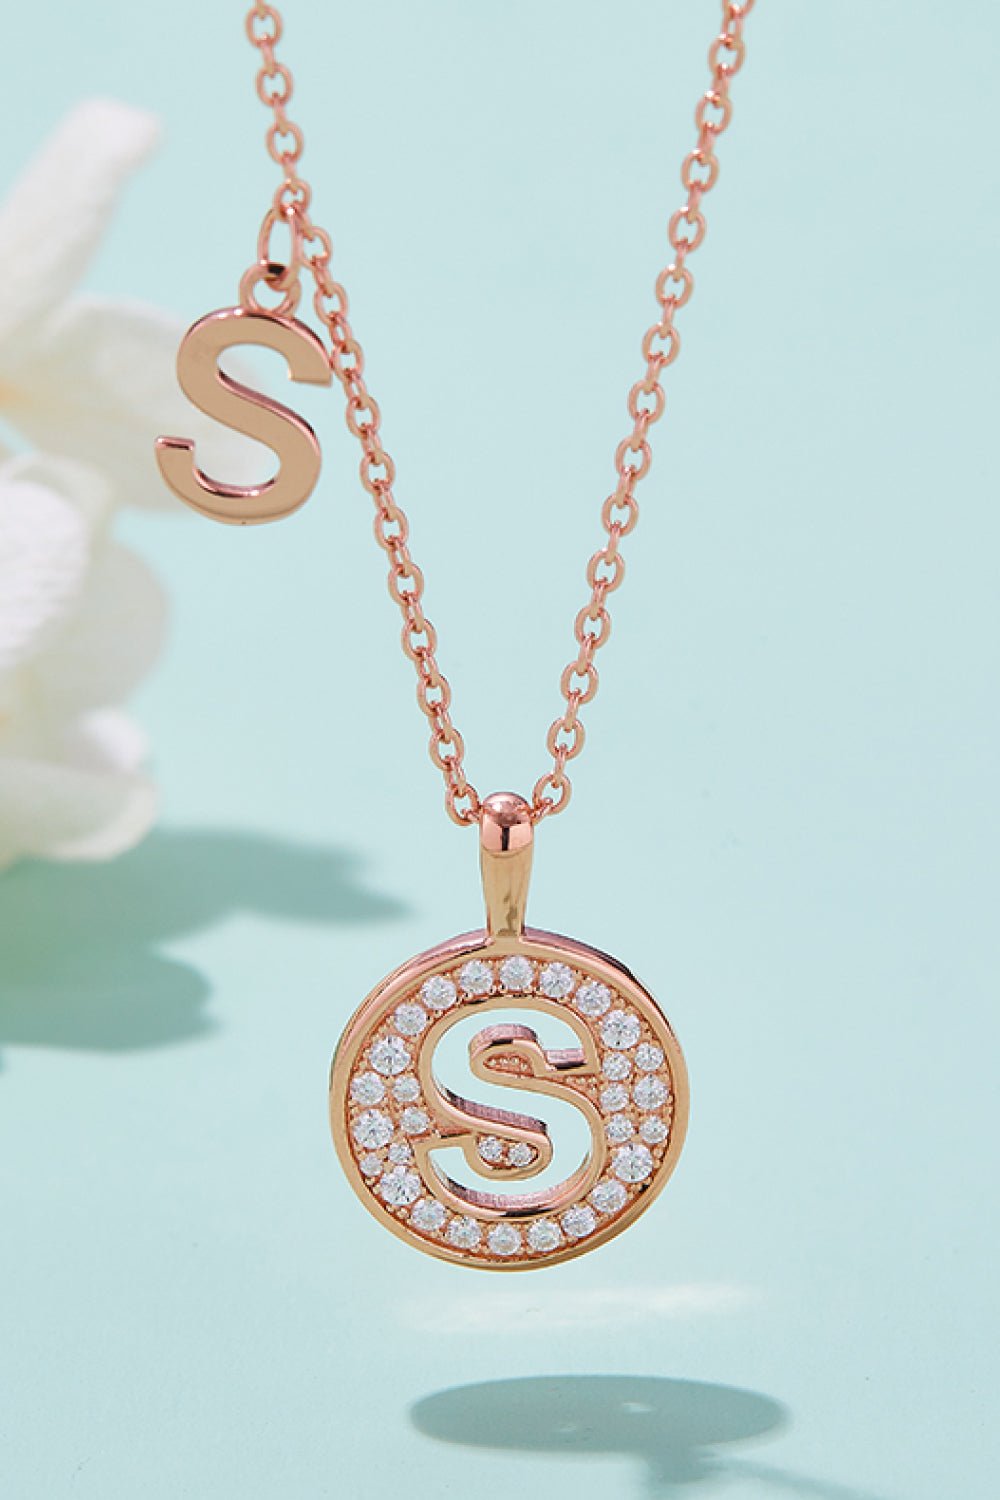 Moissanite K to T Pendant Necklace - Fashion Girl Online Store